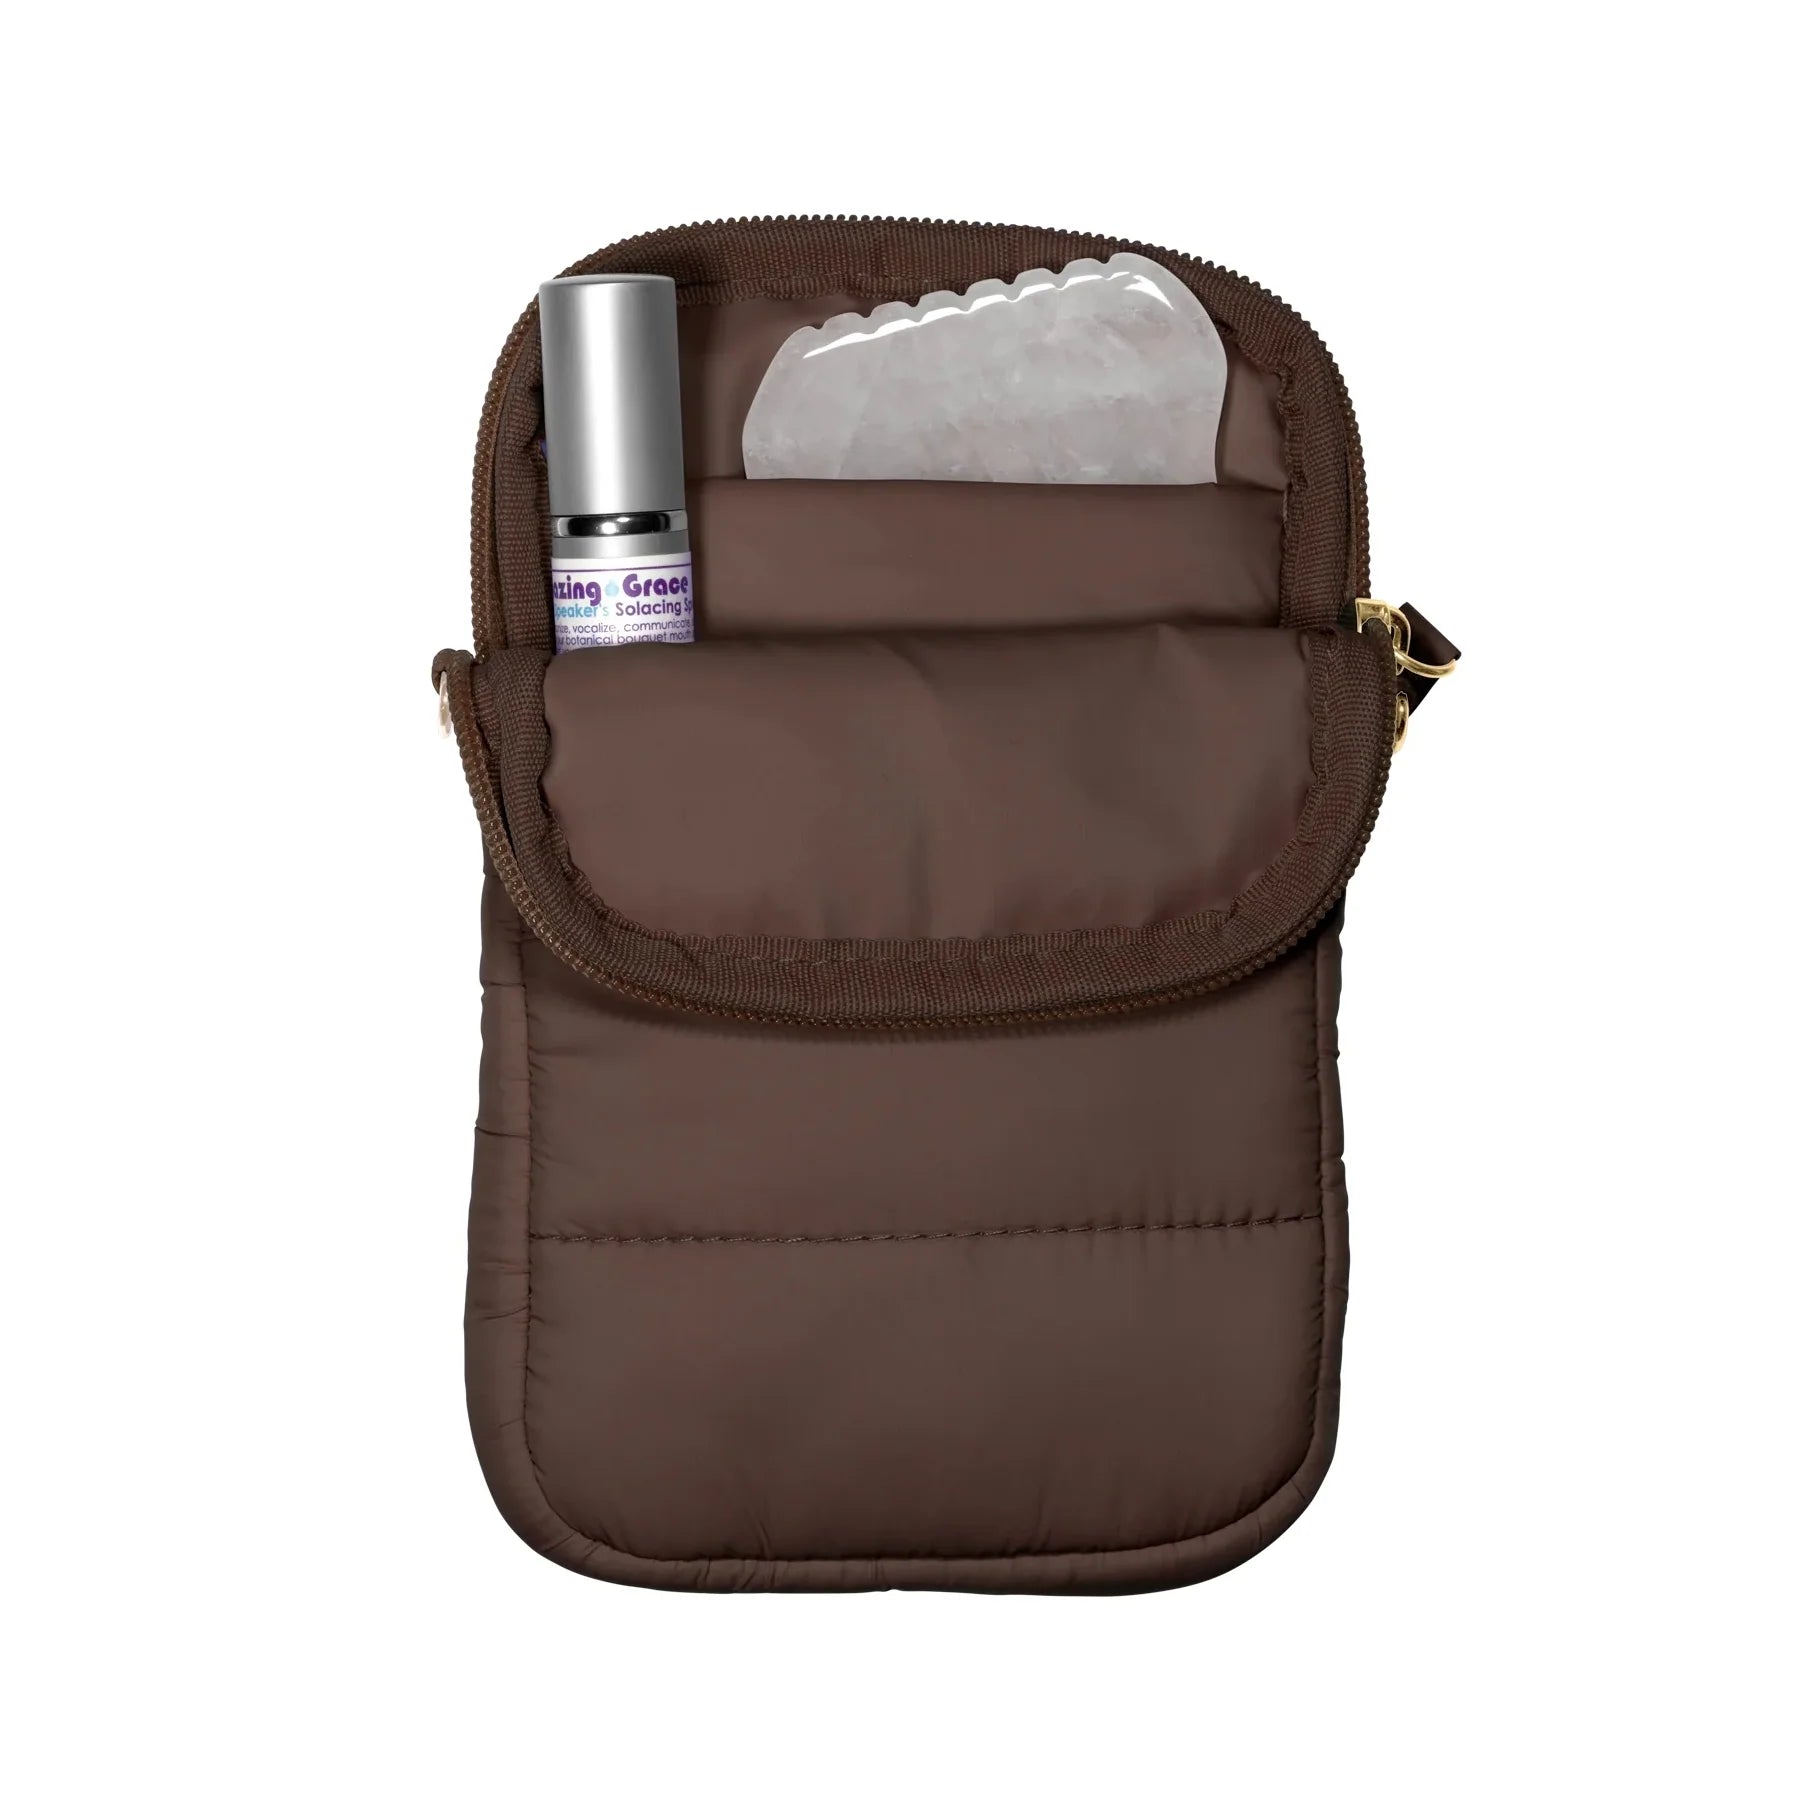 Living Libations Super Sling Puffer Traveller with EMF Shield in Coffee Bean